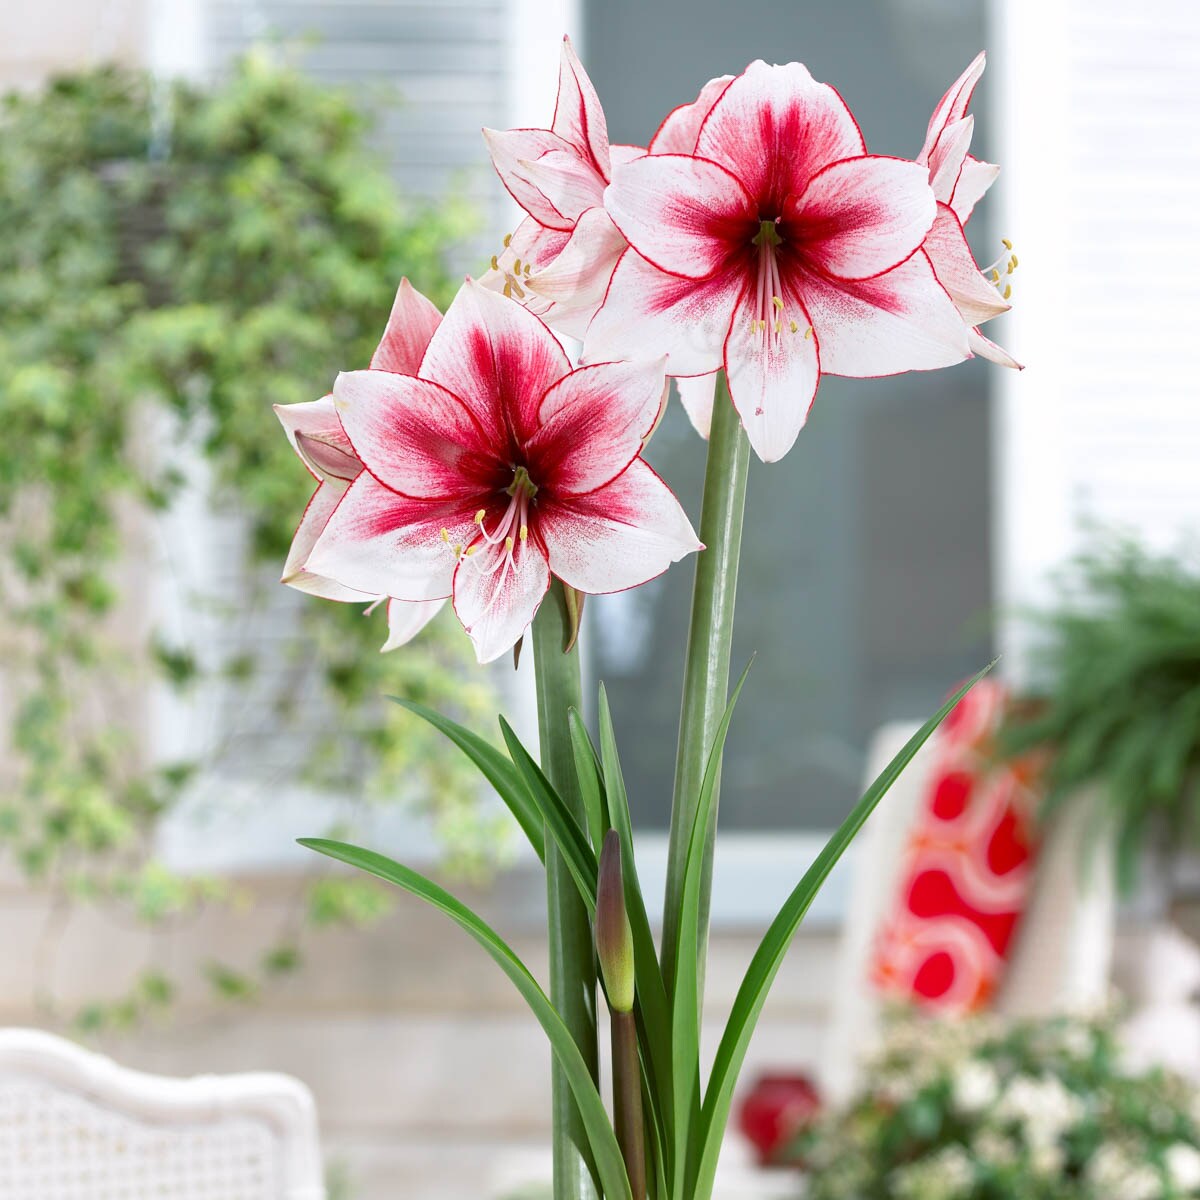 Breck's Mixed Amaryllis House Plant in 1-Pack Pot in the House Plants ...